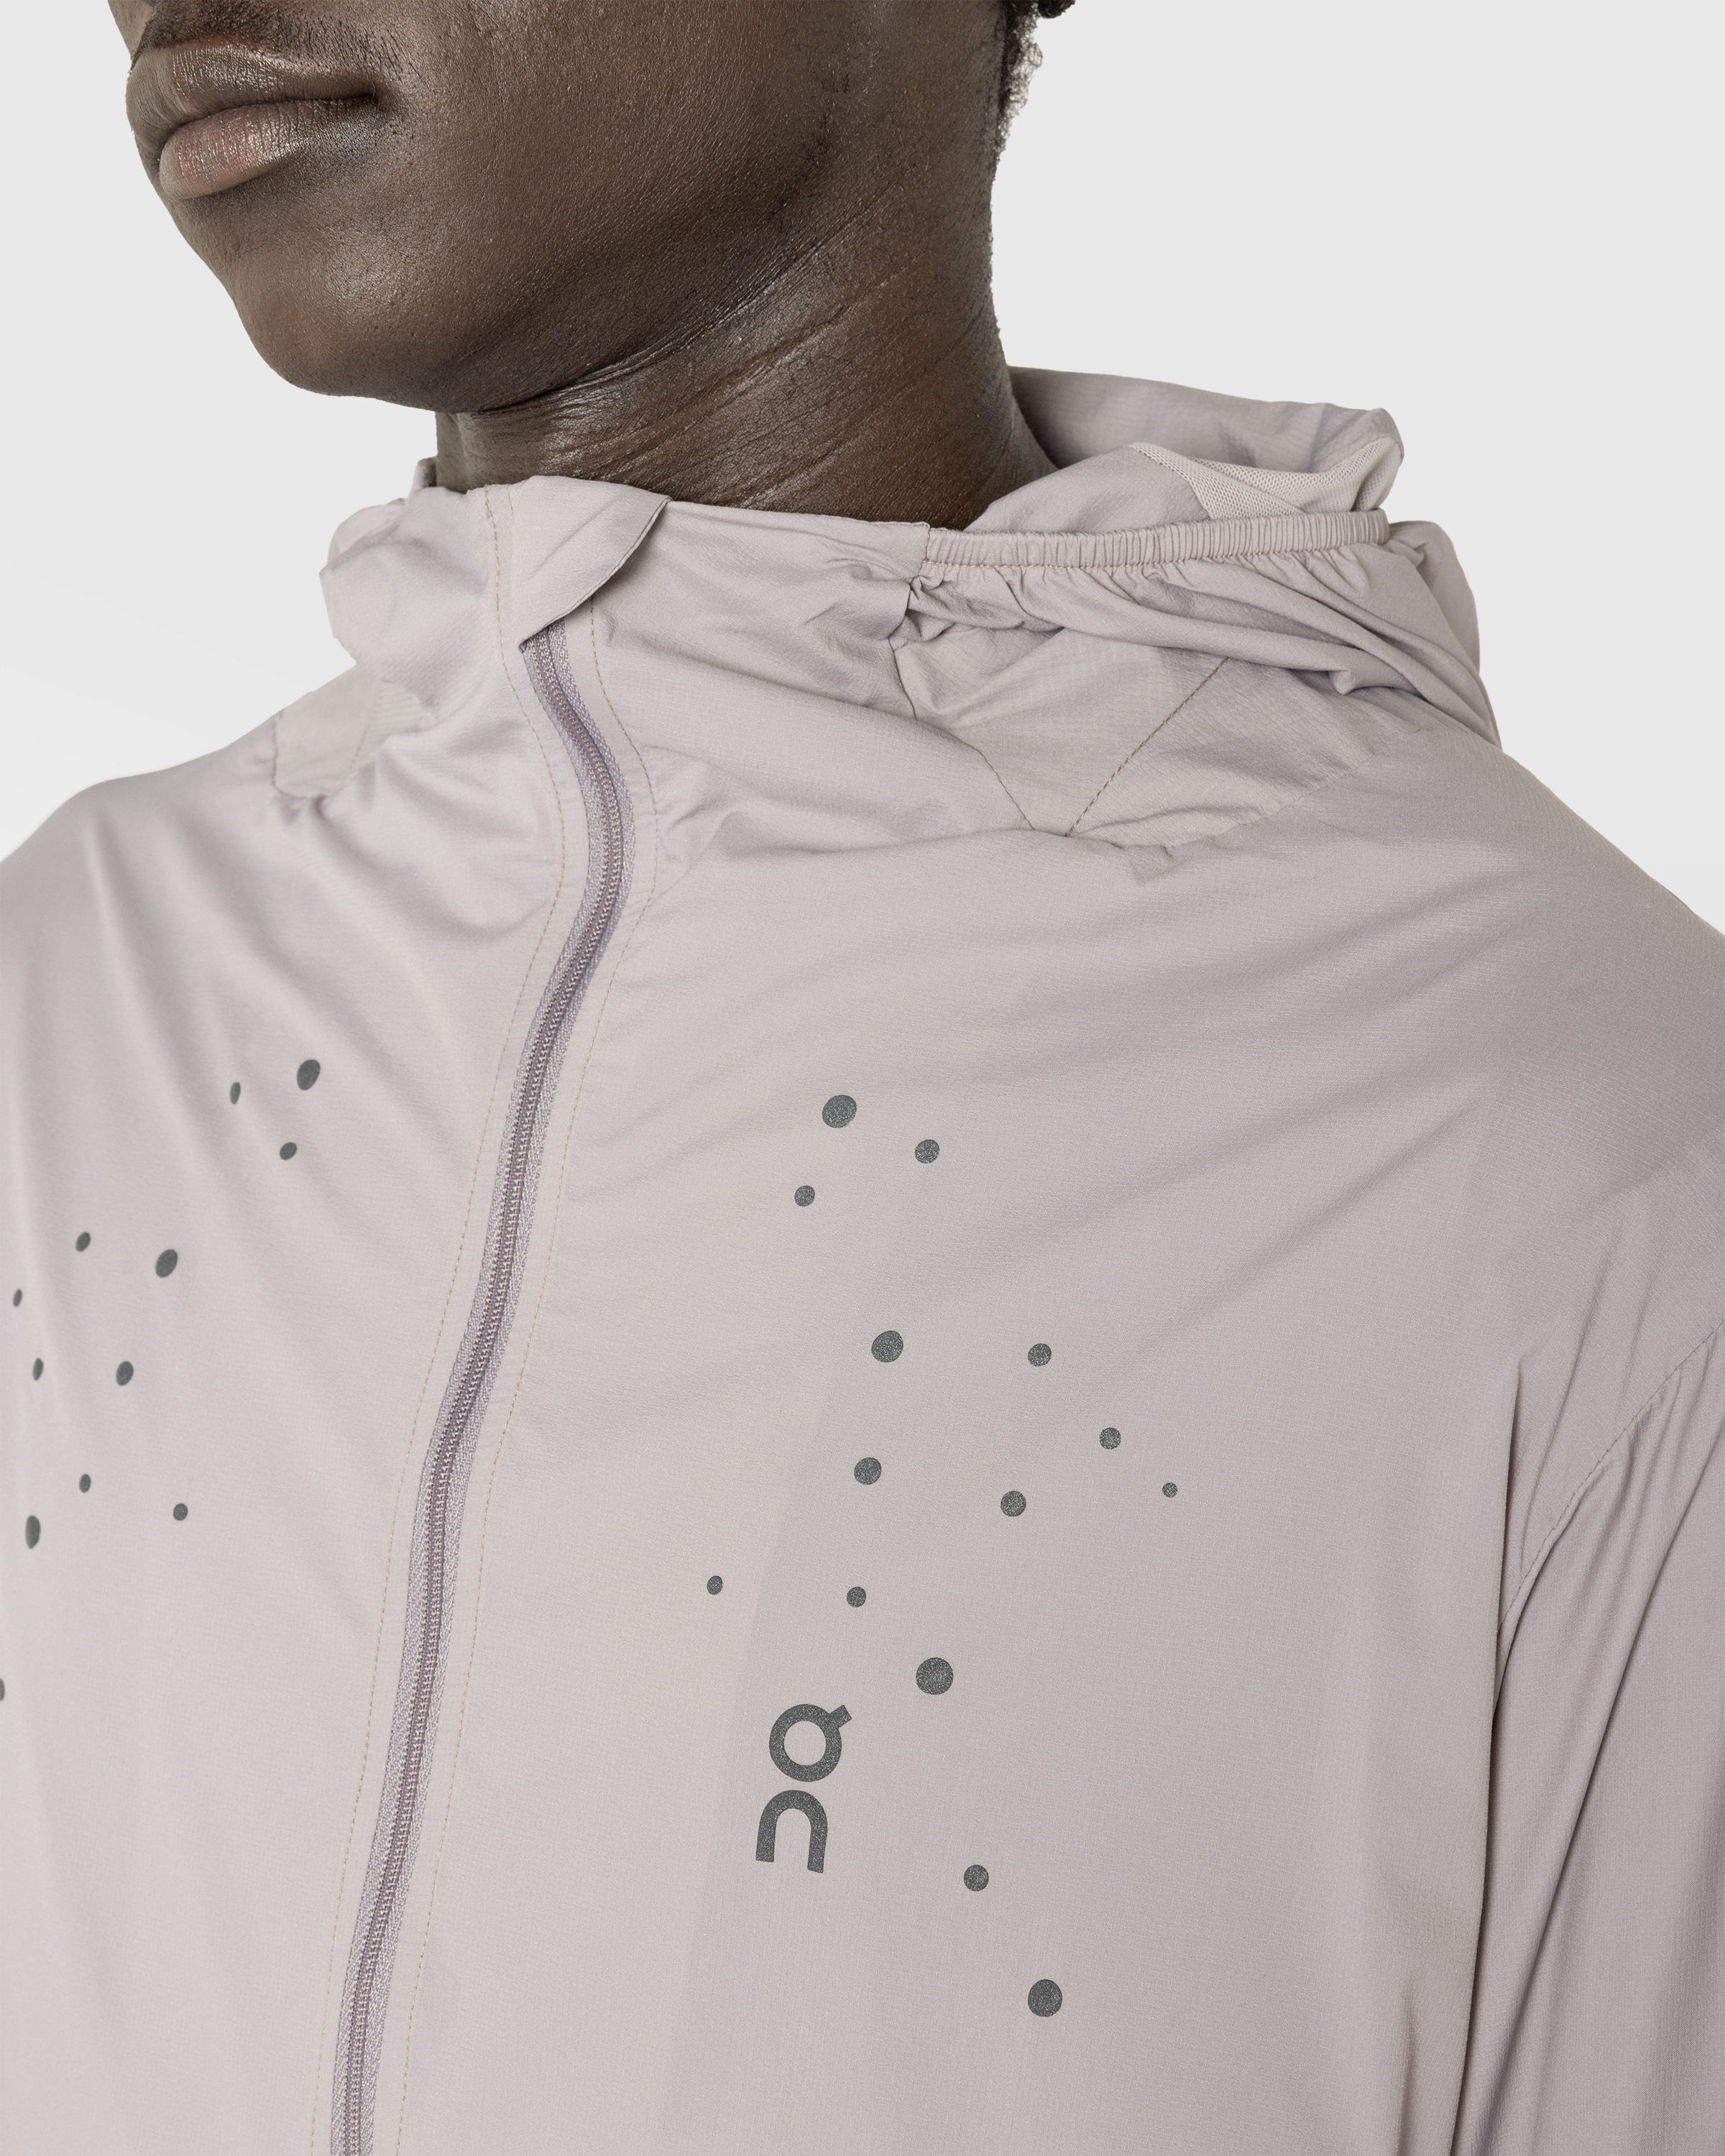 On x Post Archive Faction (PAF) – Running Jacket Zinc - Outerwear - Grey - Image 5